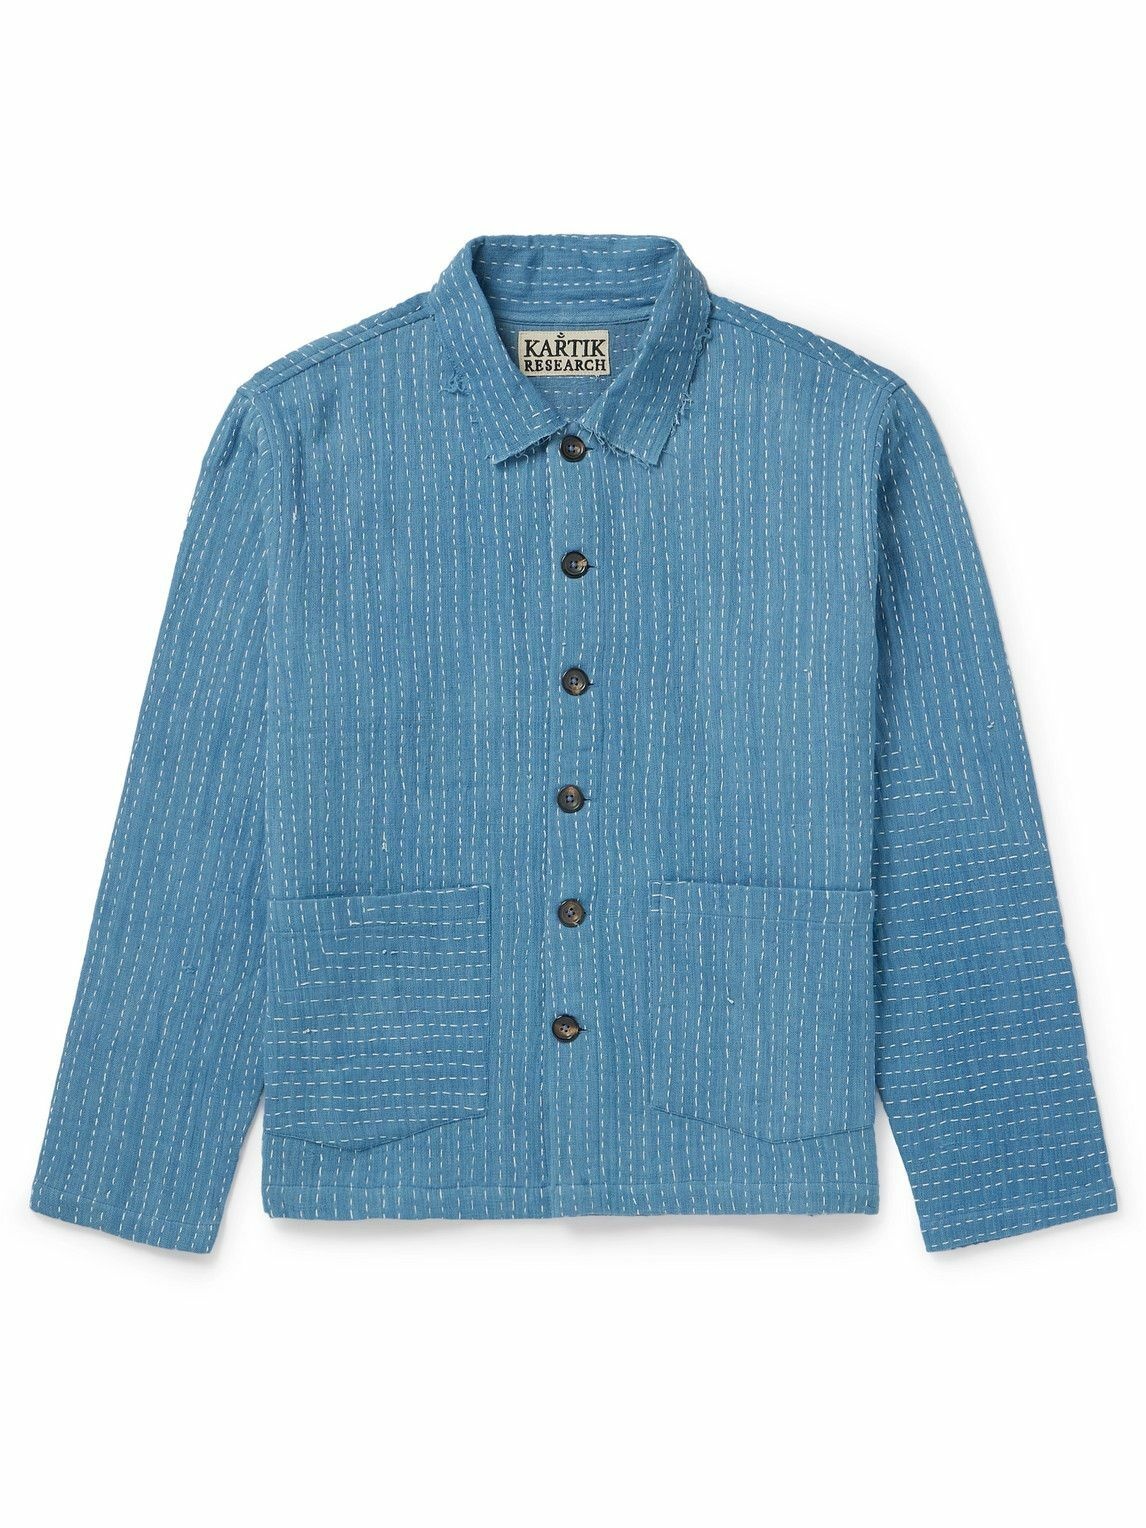 Photo: Kartik Research - Cropped Embroidered Cotton Jacket - Blue